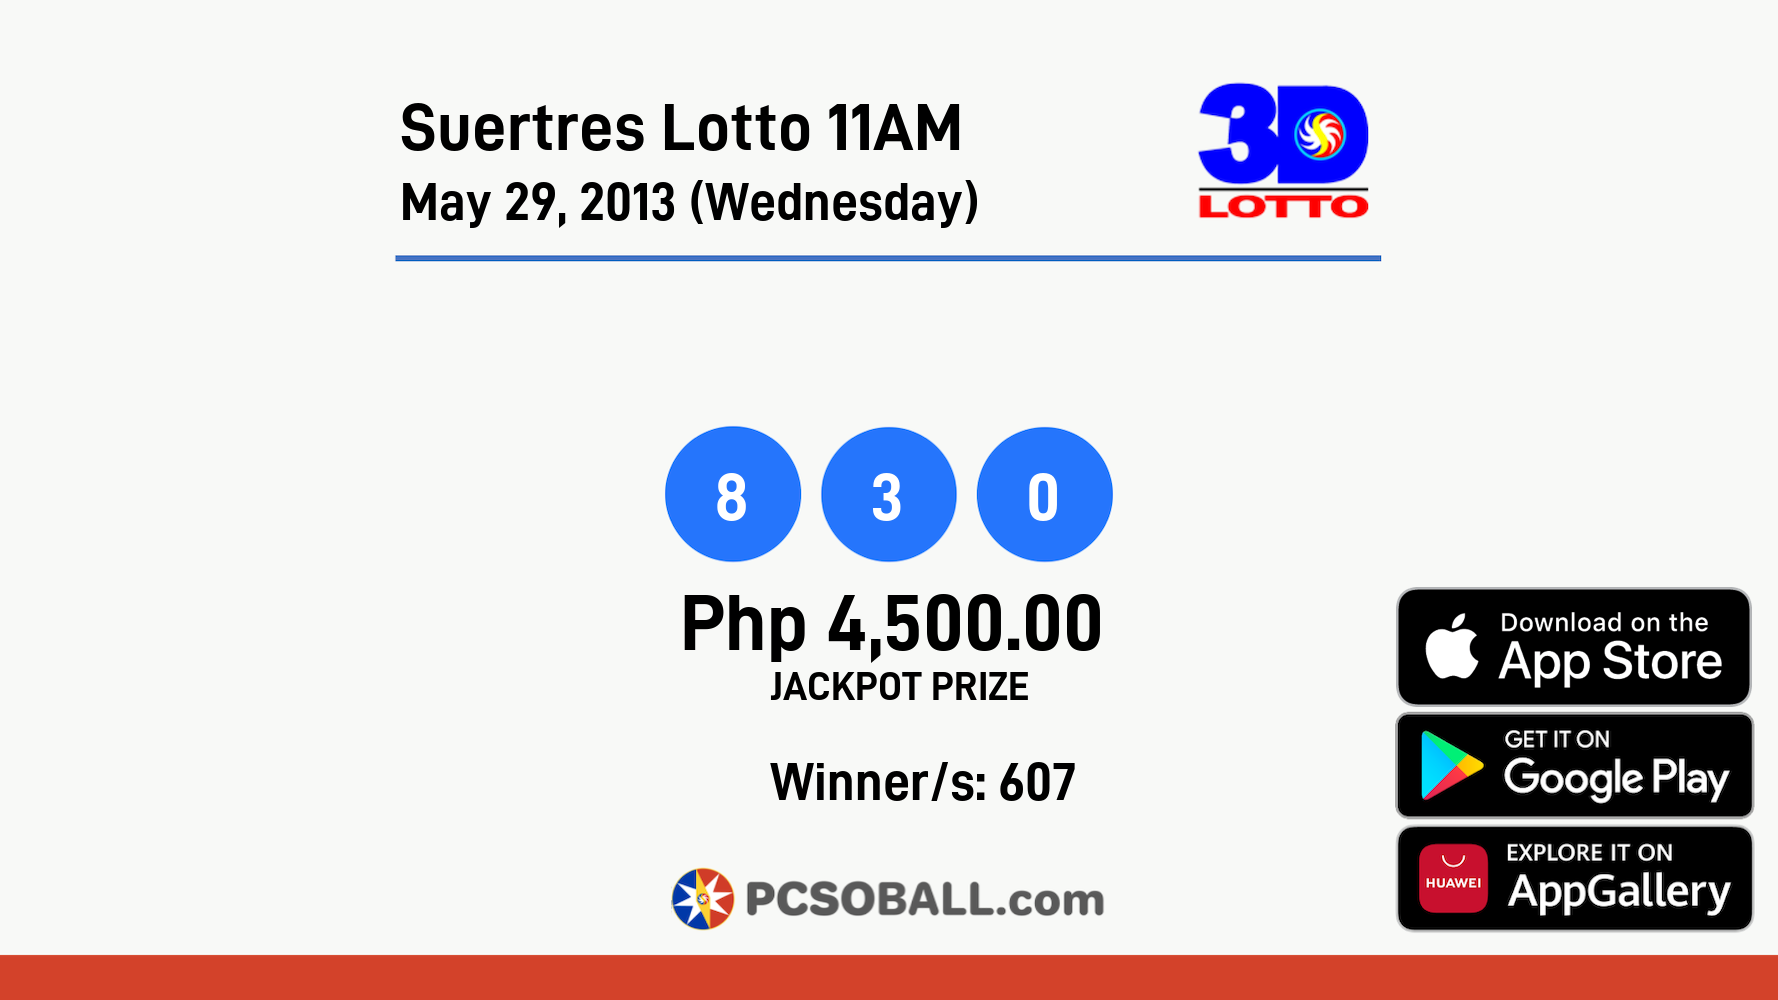 Suertres Lotto 11AM May 29, 2013 (Wednesday) Result